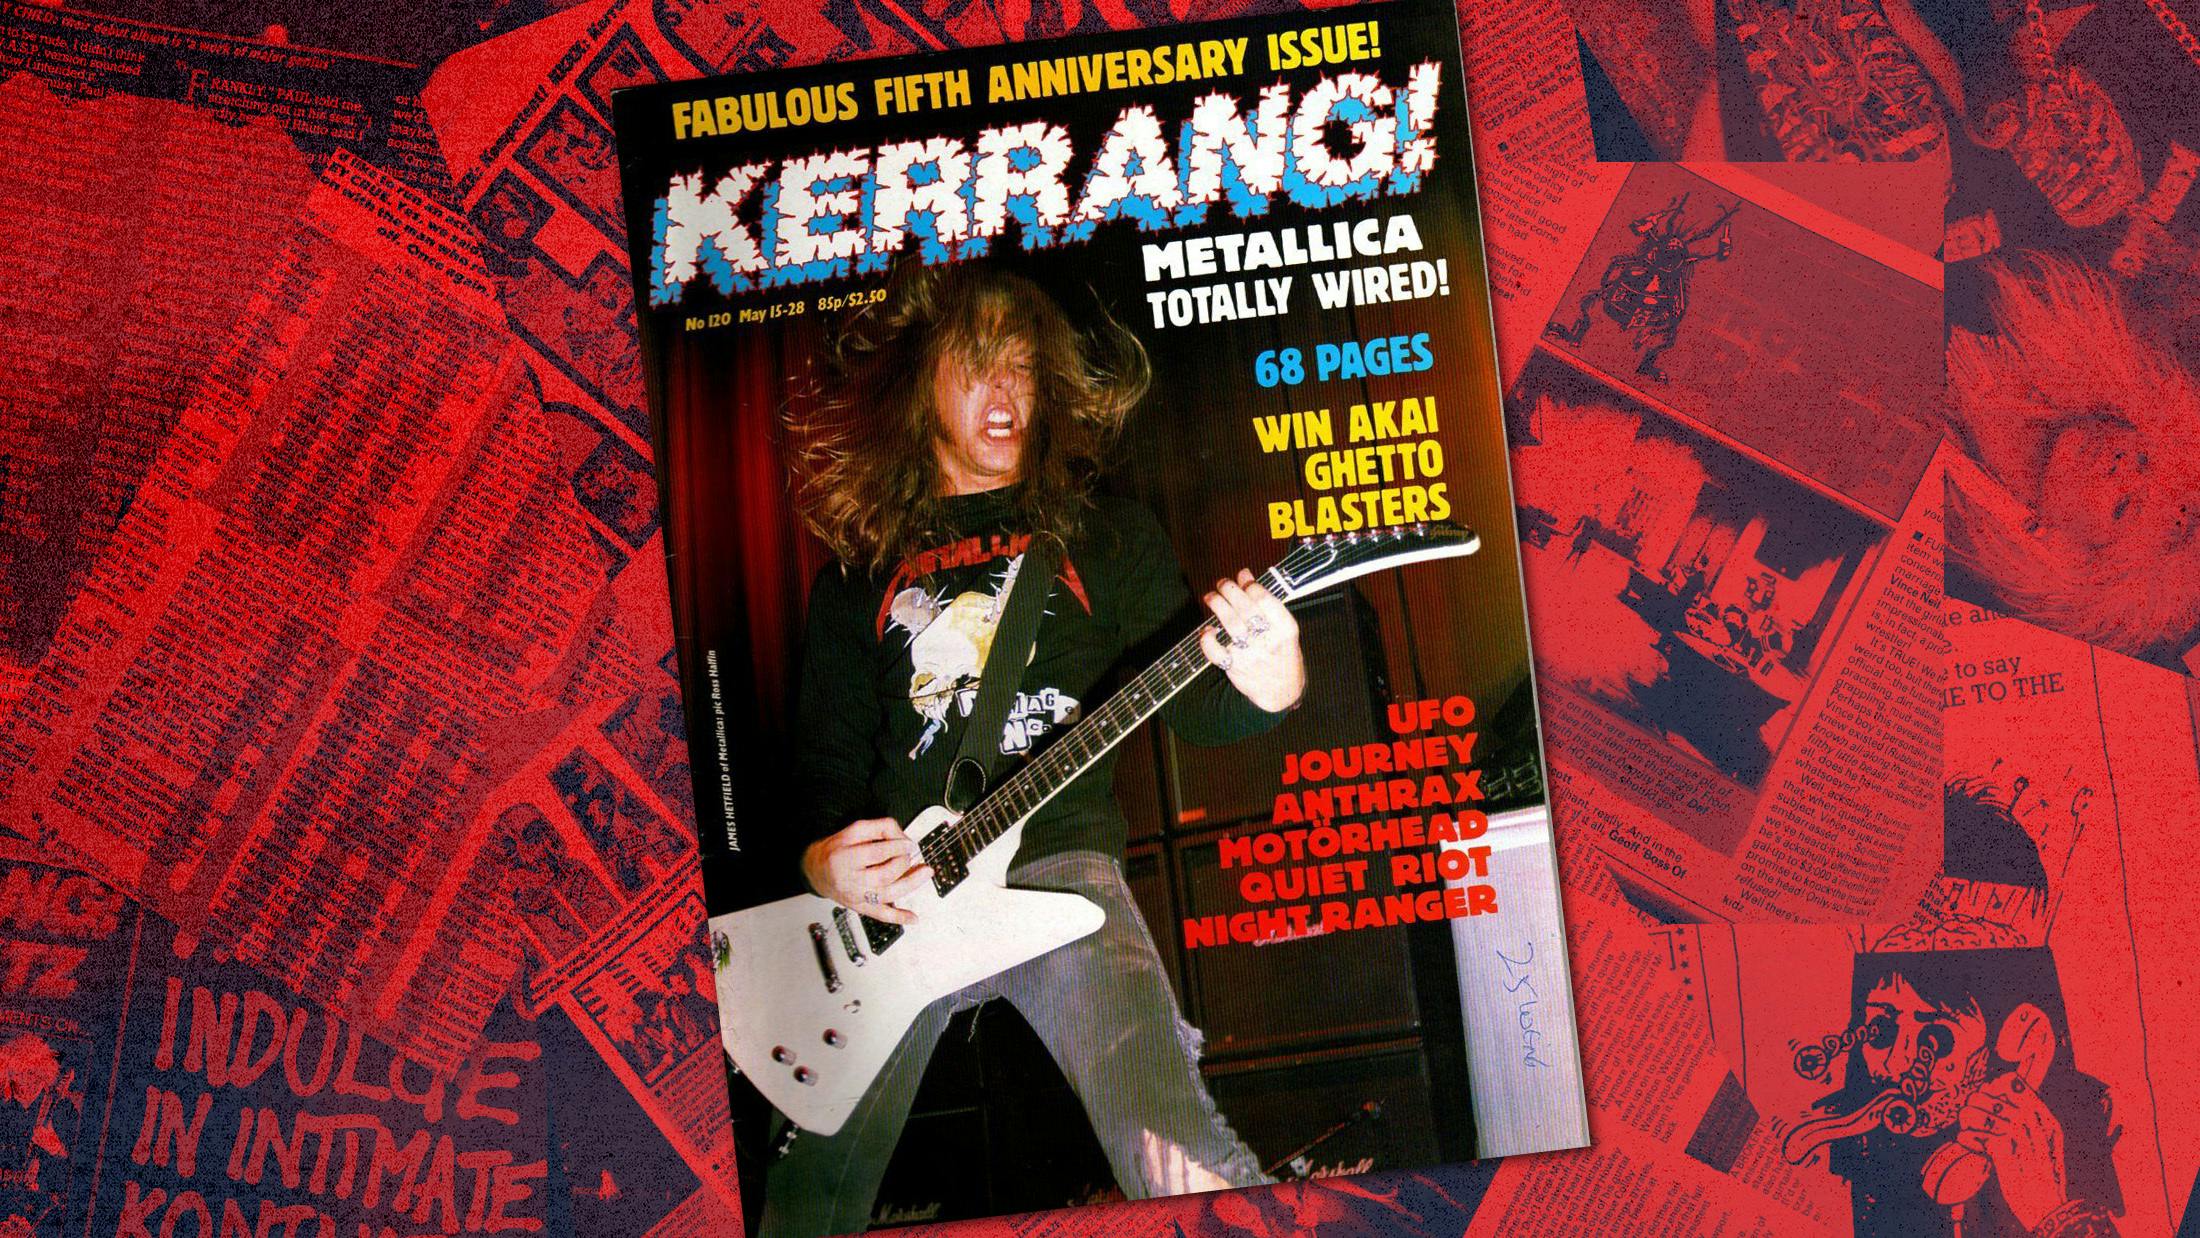 This Week In Kerrang! History: Issue 120, May 15-28, 1986